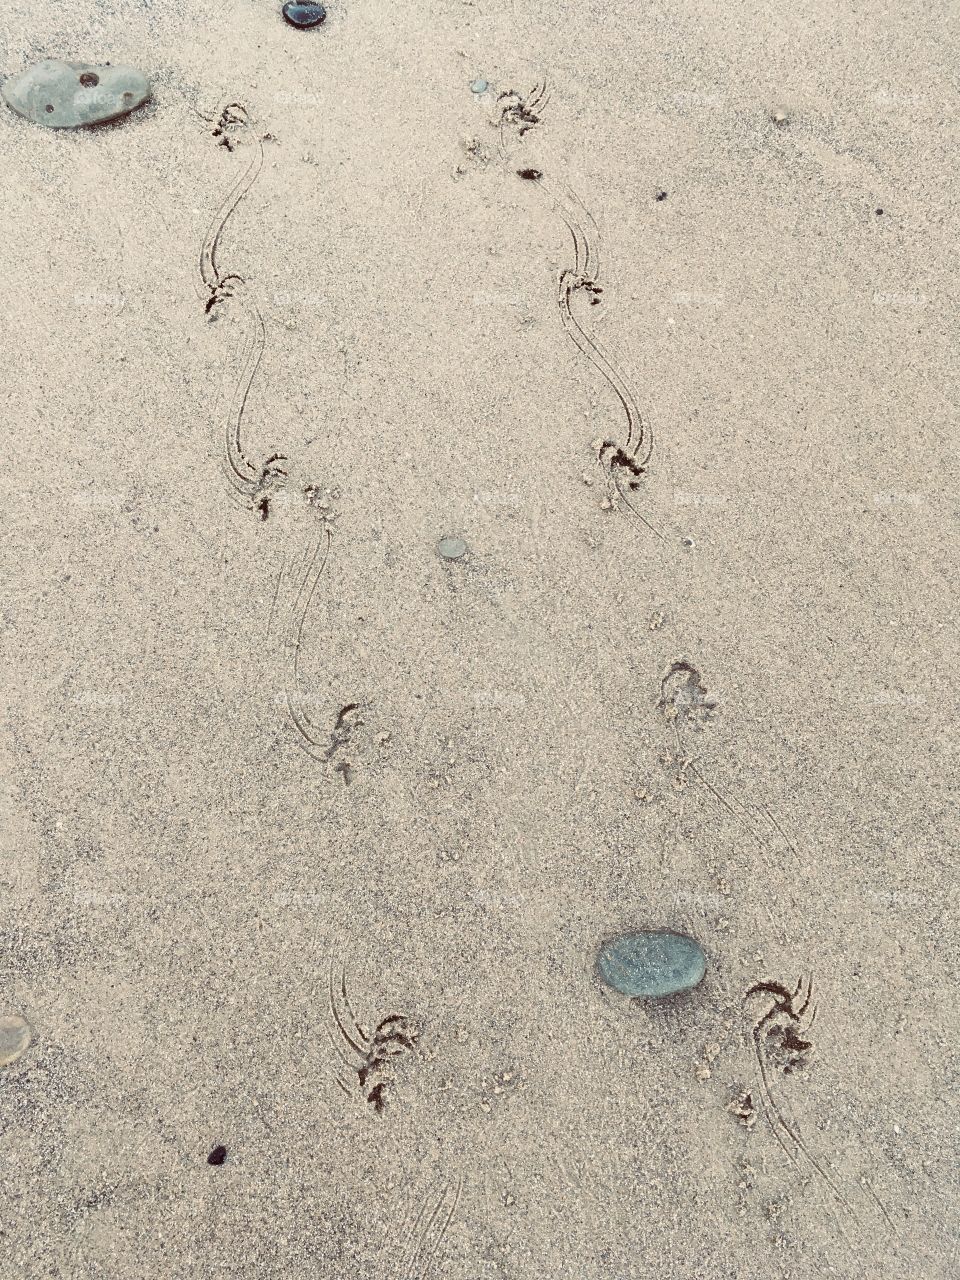 Sea otter tracks in the sand